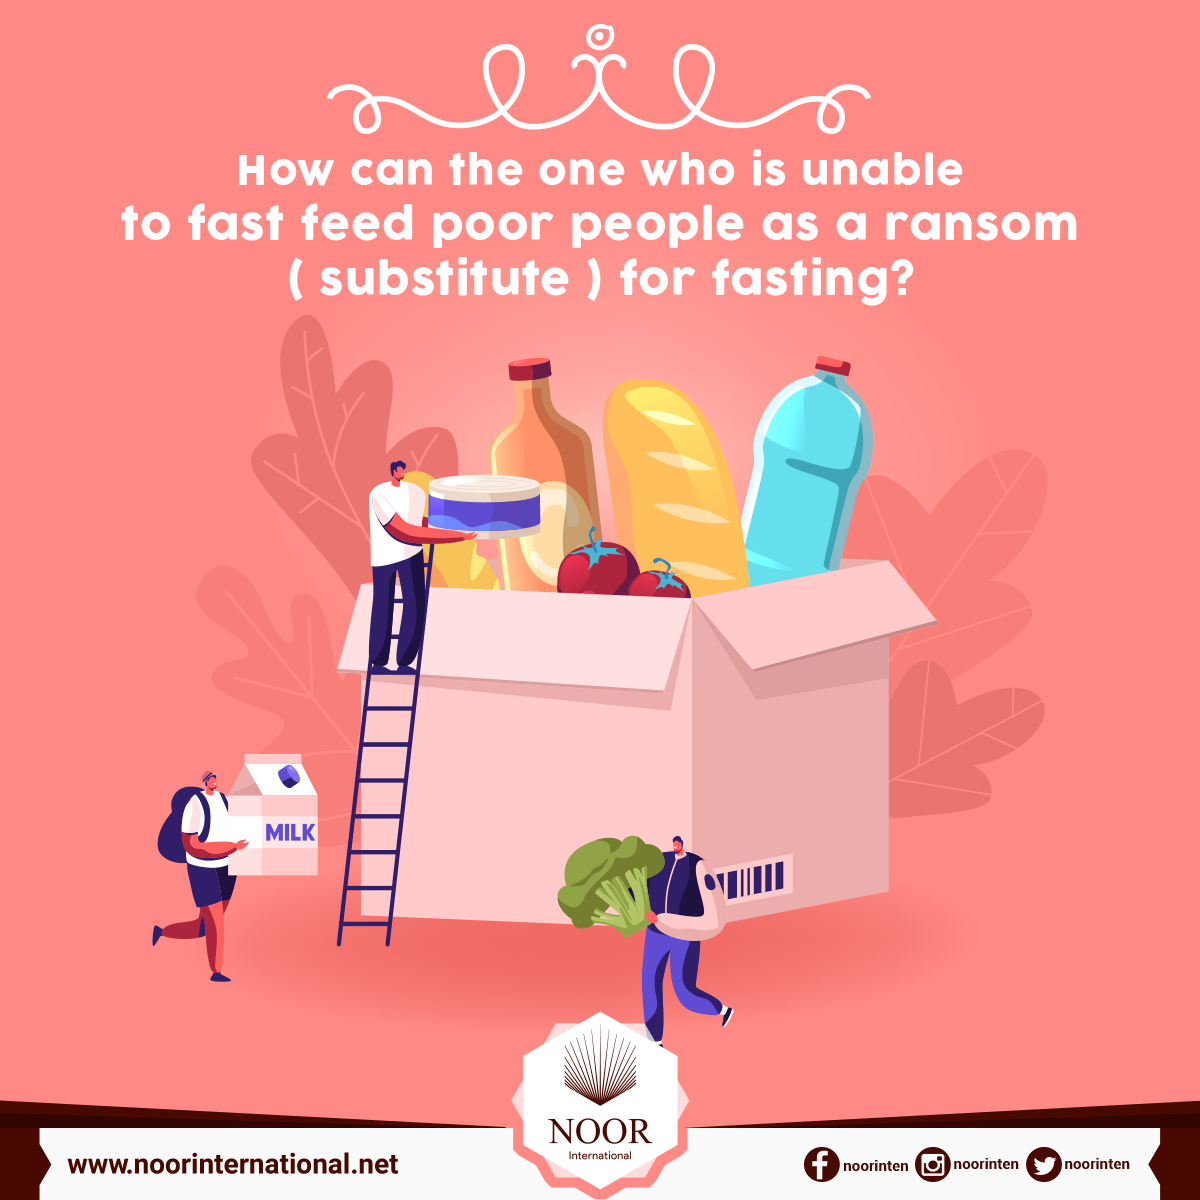 How can the one who is unable to fast feed poor people as a ransom ( substitute ) for fasting?